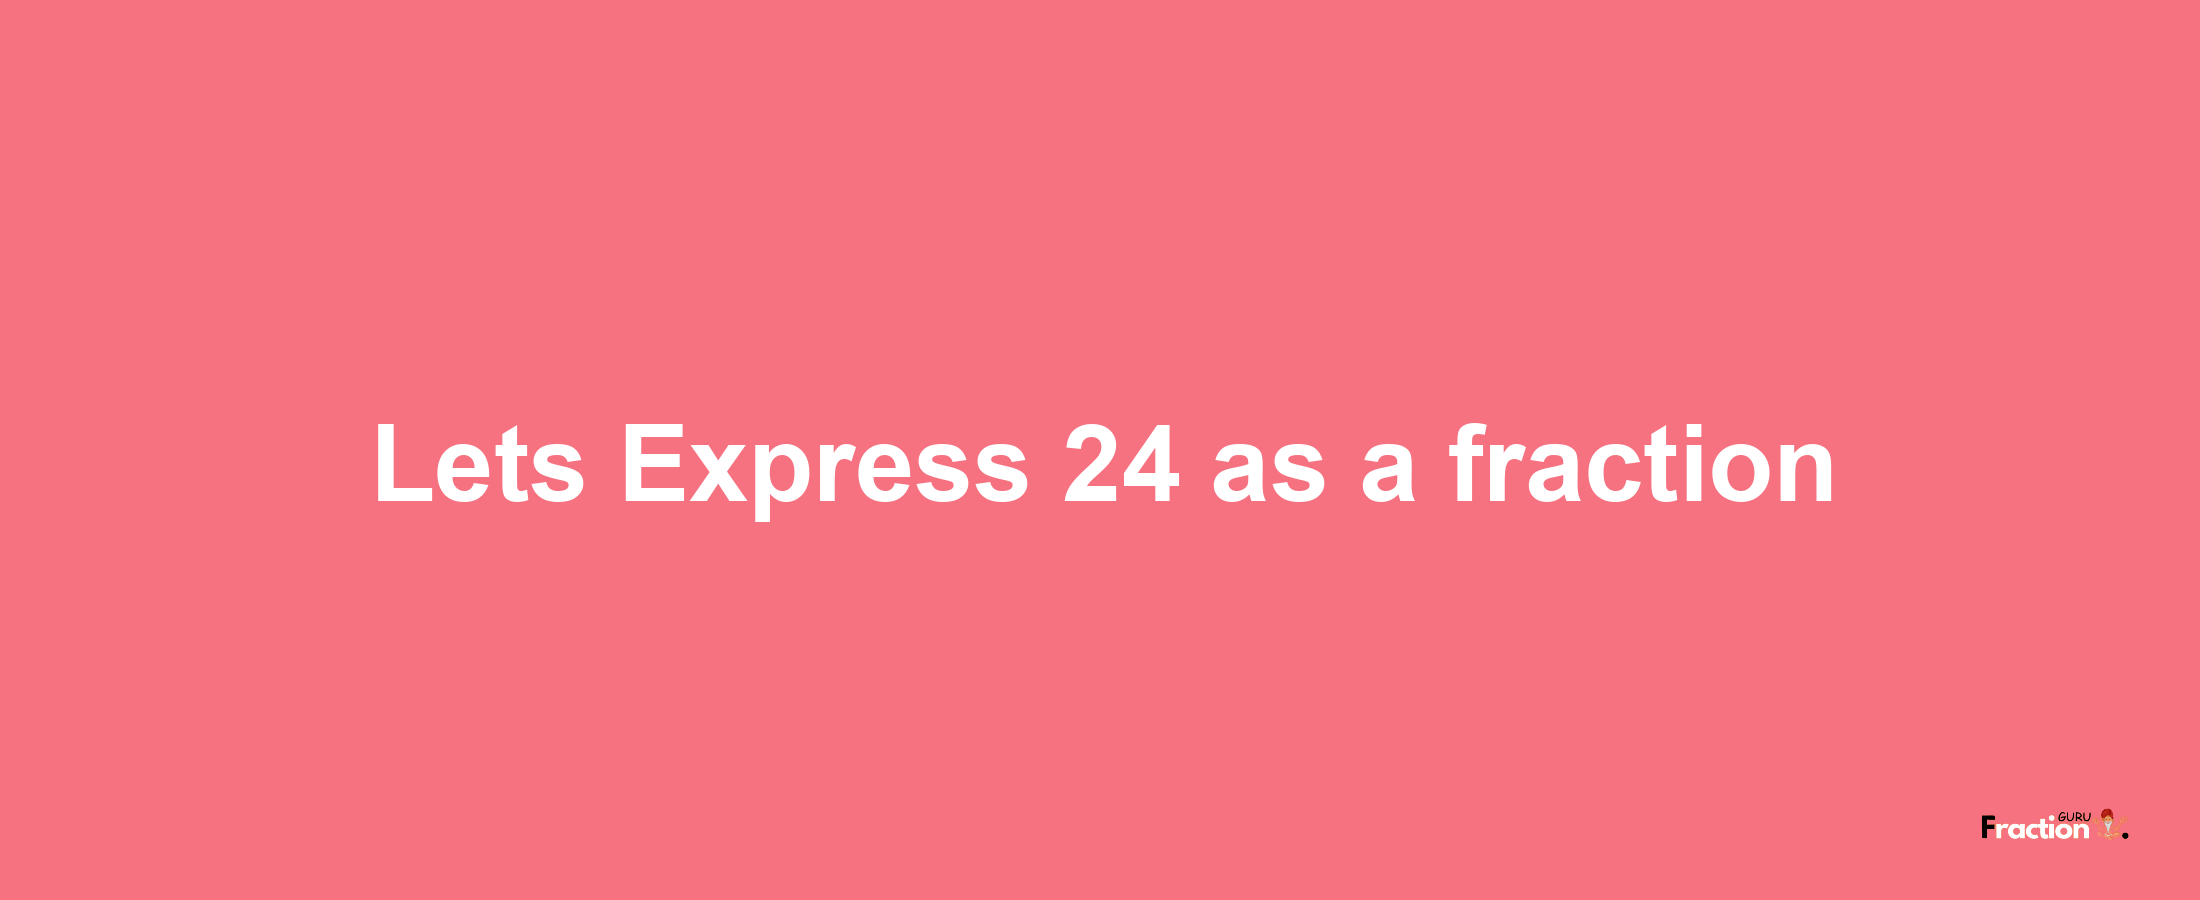 Lets Express 24 as afraction